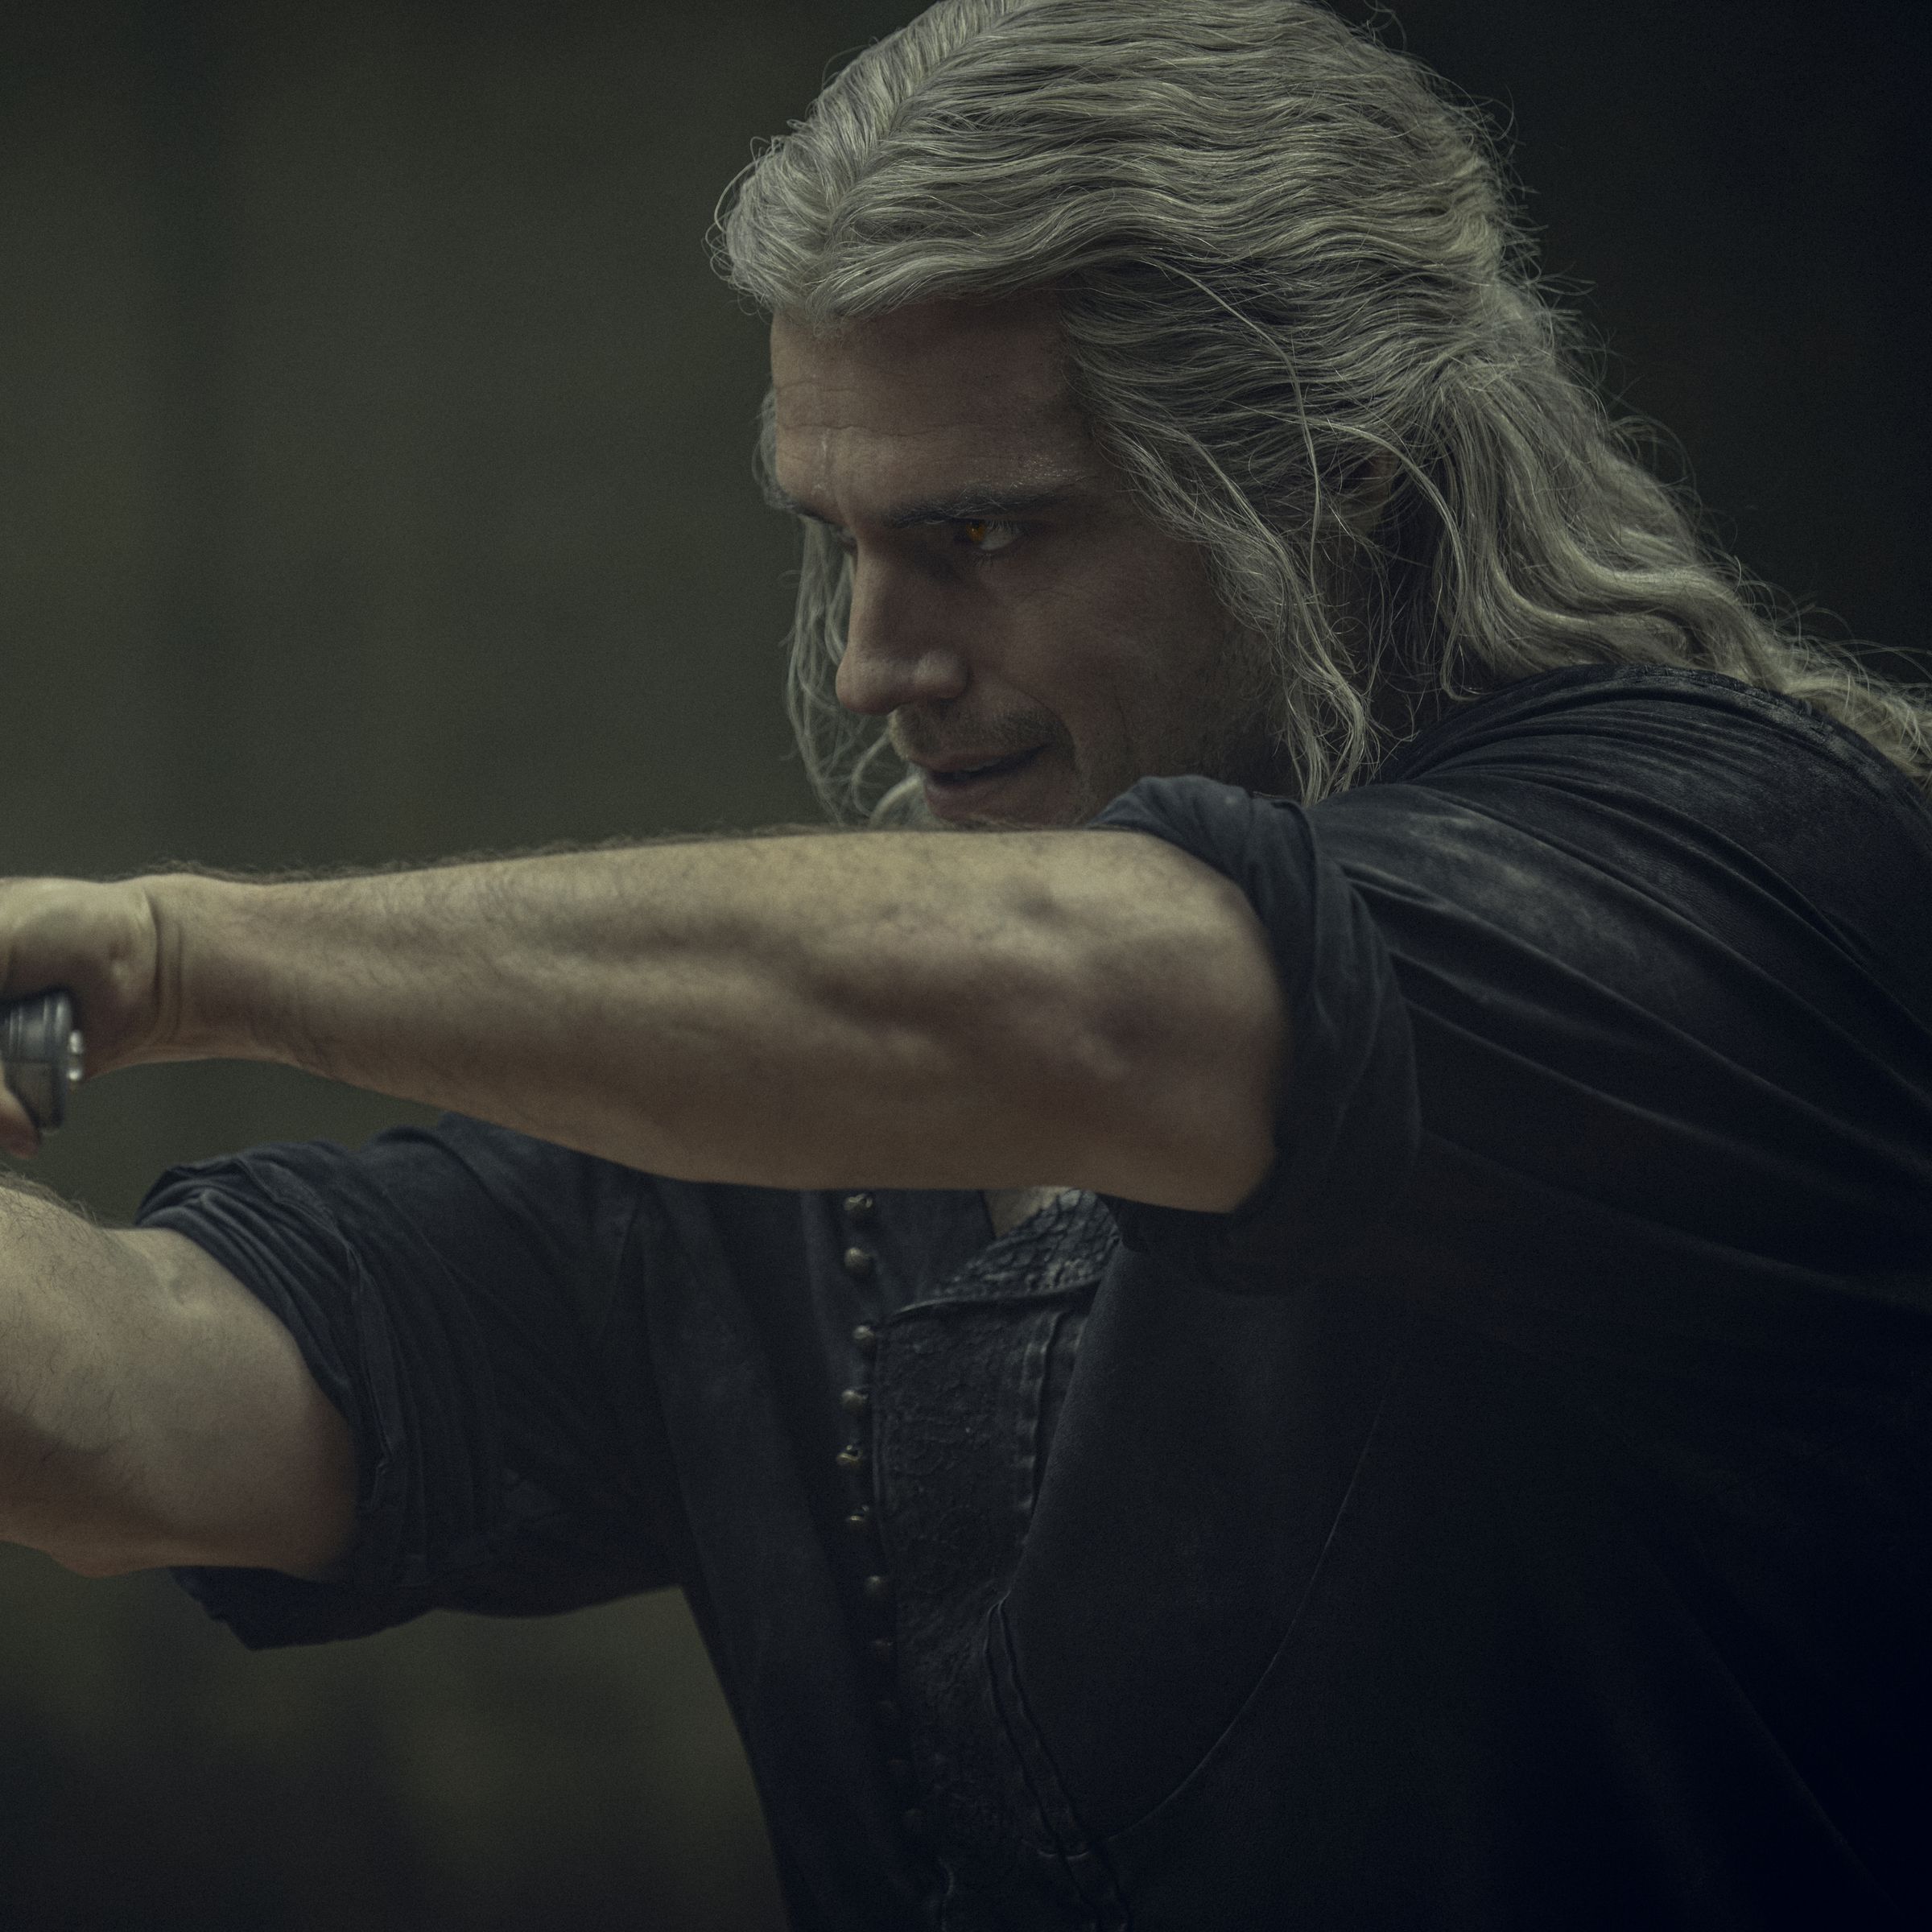 A still photo of Henry Cavill in The Witcher.